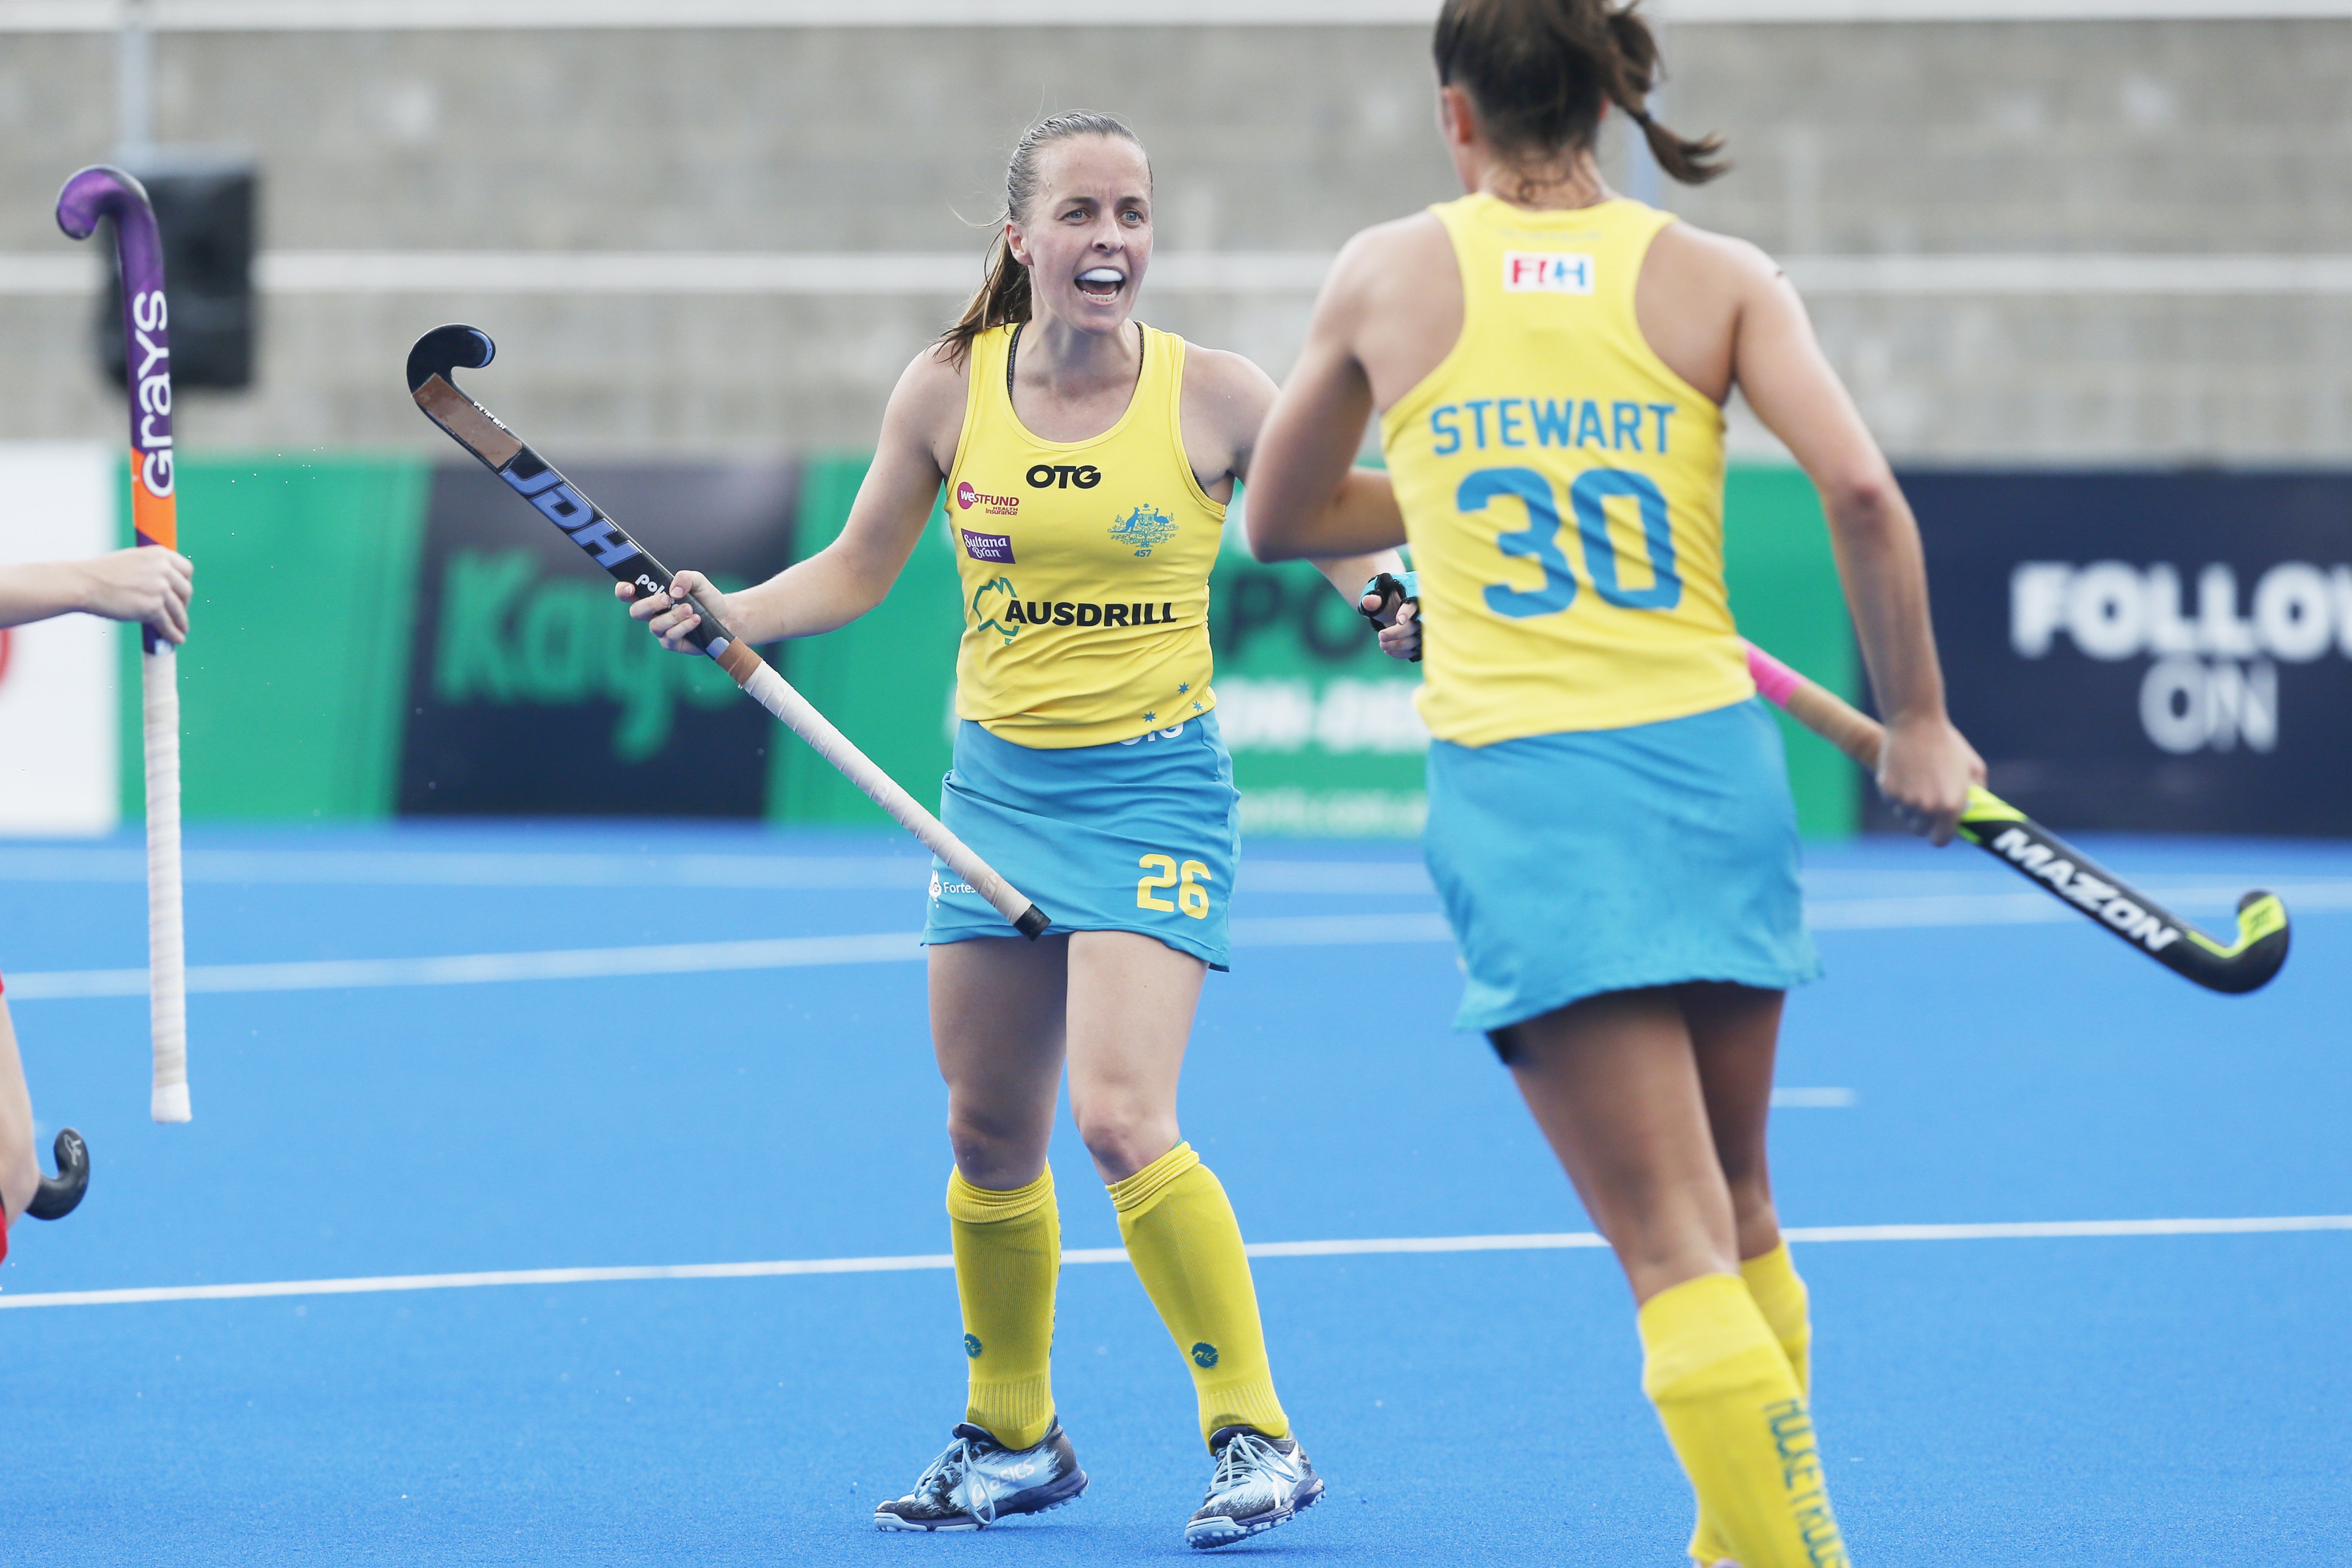 Crookwell Memorial Oval building named after Hockeyroos star Emily Chalker